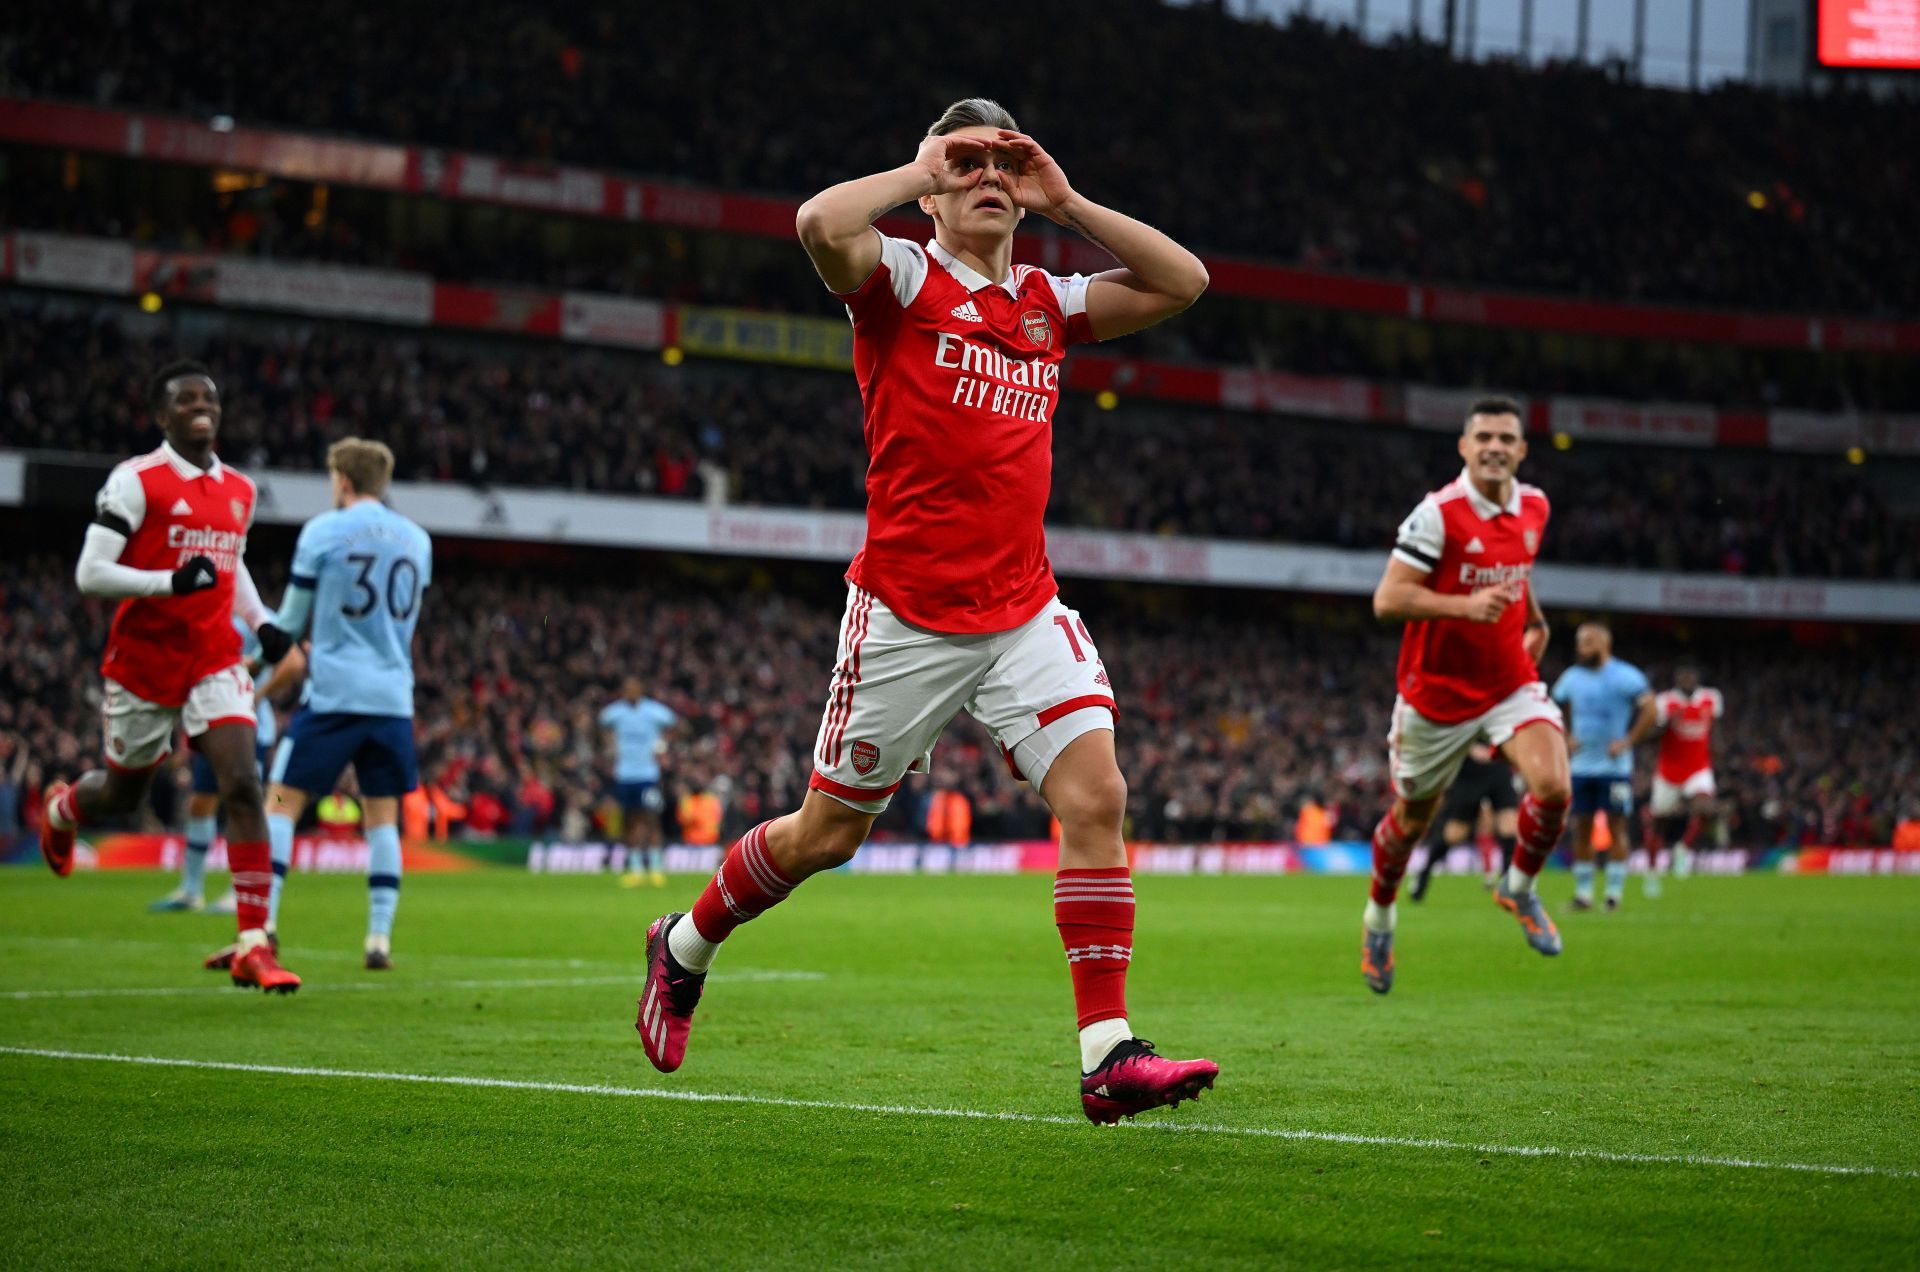 Trossard has had a rousing start to life at the Emirates.